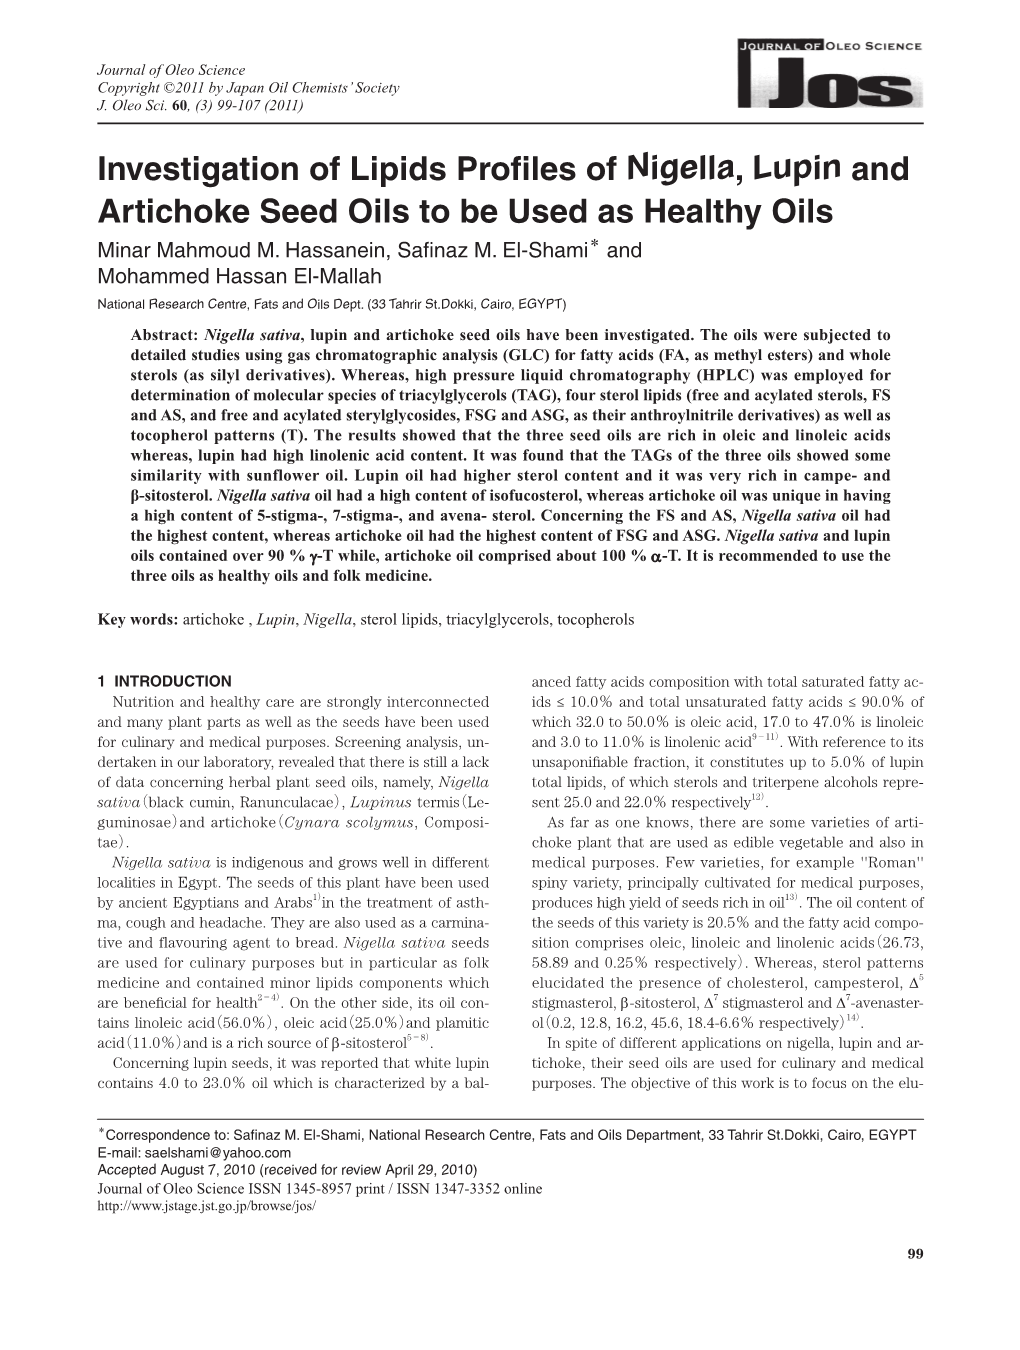 Investigation of Lipids Profiles of Nigella, Lupin and Artichoke Seed Oils to Be Used As Healthy Oils